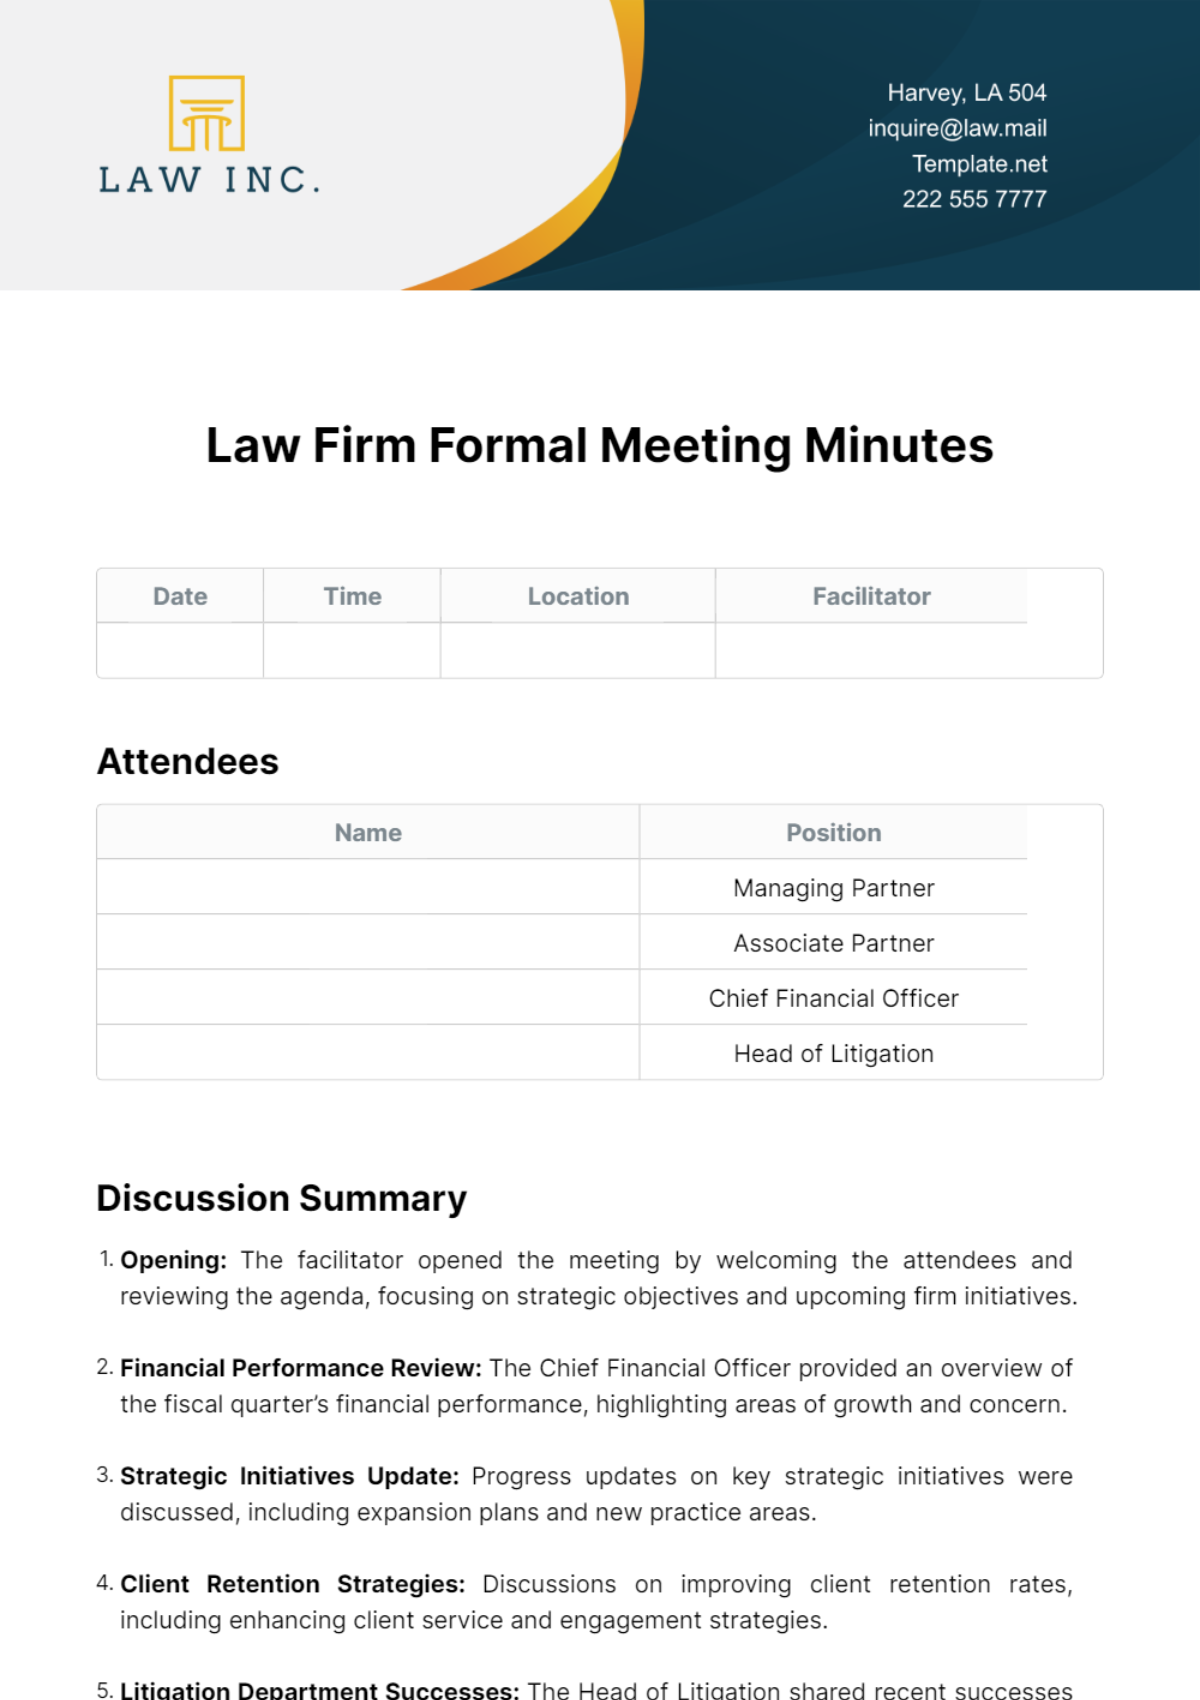 Law Firm Formal Meeting Minutes Template